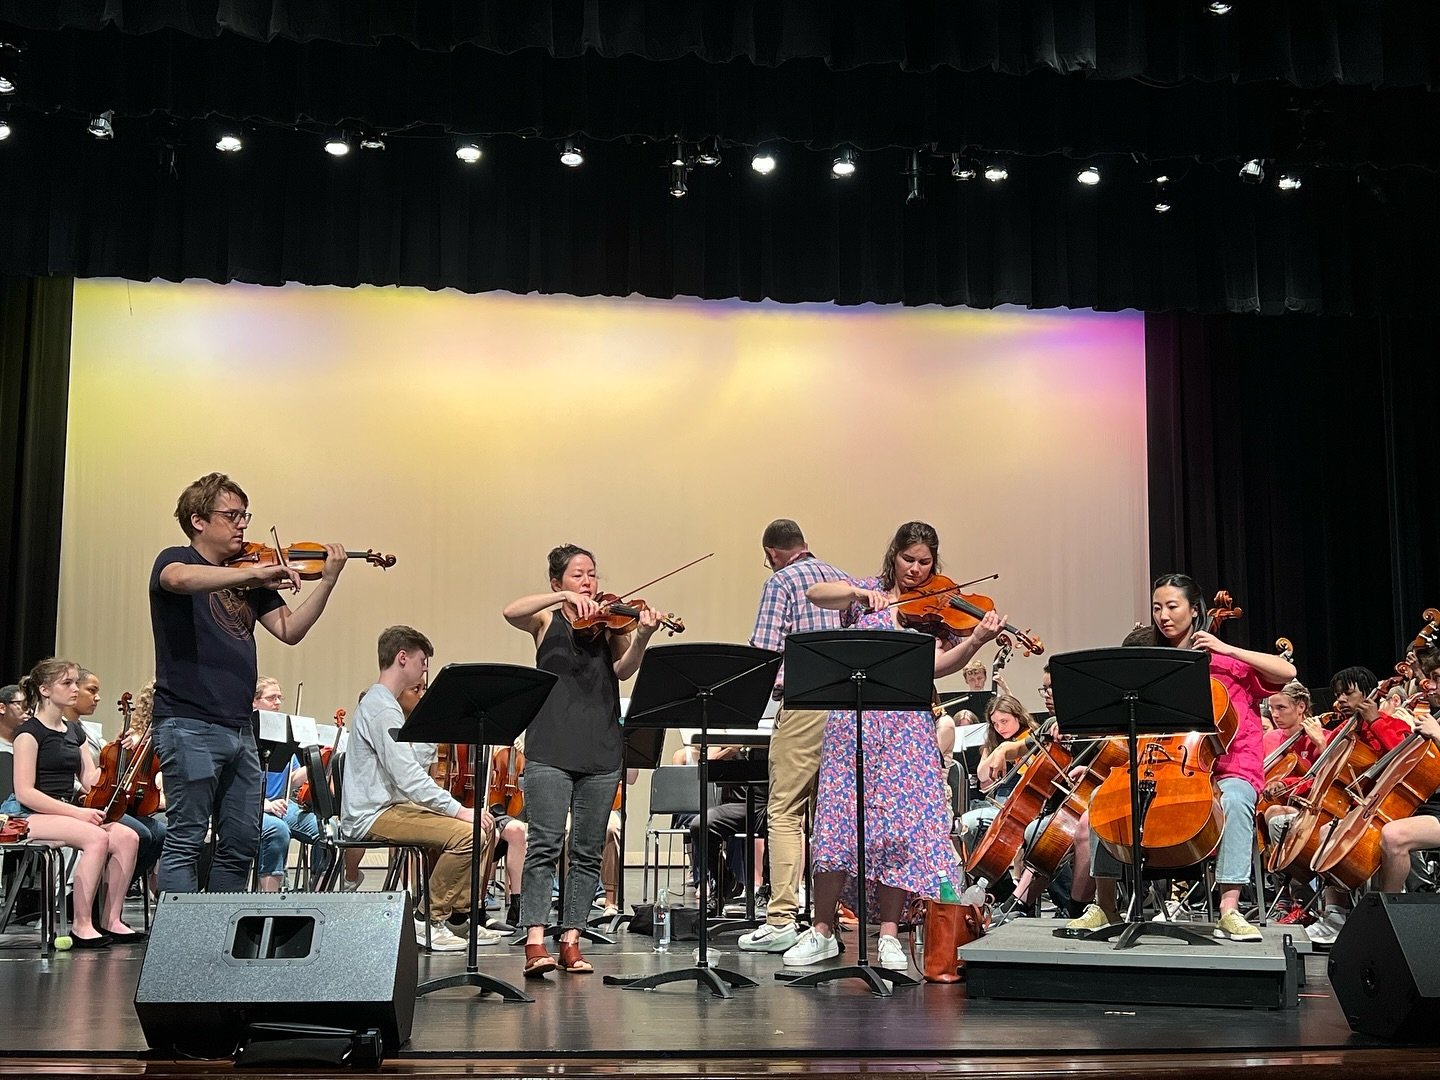 Getting ready for tomorrow&rsquo;s concert! 🎻

Rehearsing the world premiere of the commissioned new work of composer Alexandra T. Bryant, performed by Cass Tech and Grosse Pointe South high schools along with the Aeolus Quartet. Don&rsquo;t miss it